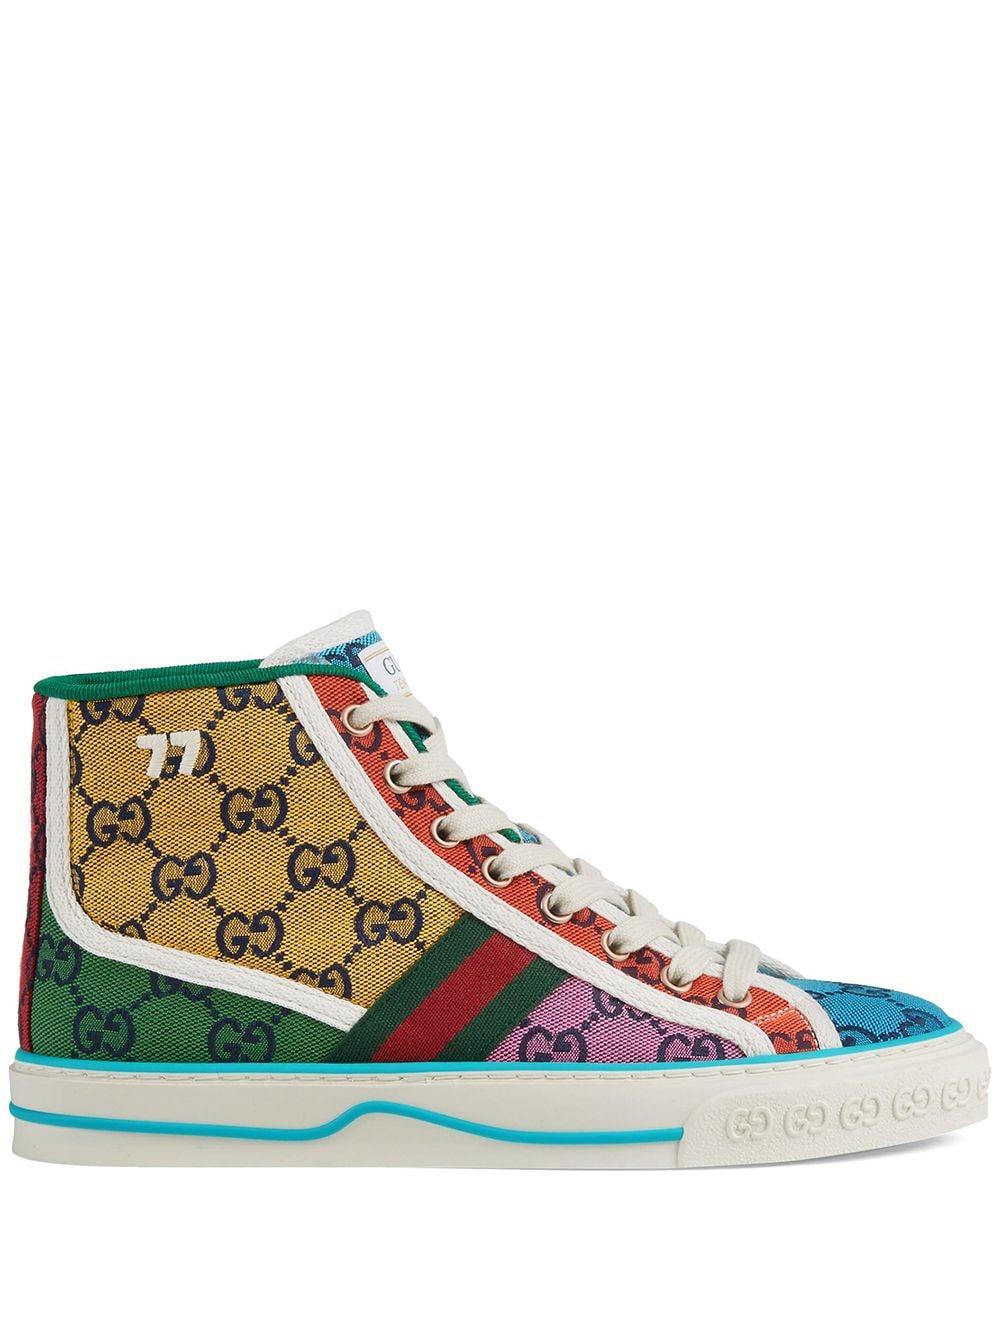 Gucci Tennis 1977 GG Multicolor High-top Sneakers in Yellow | Lyst